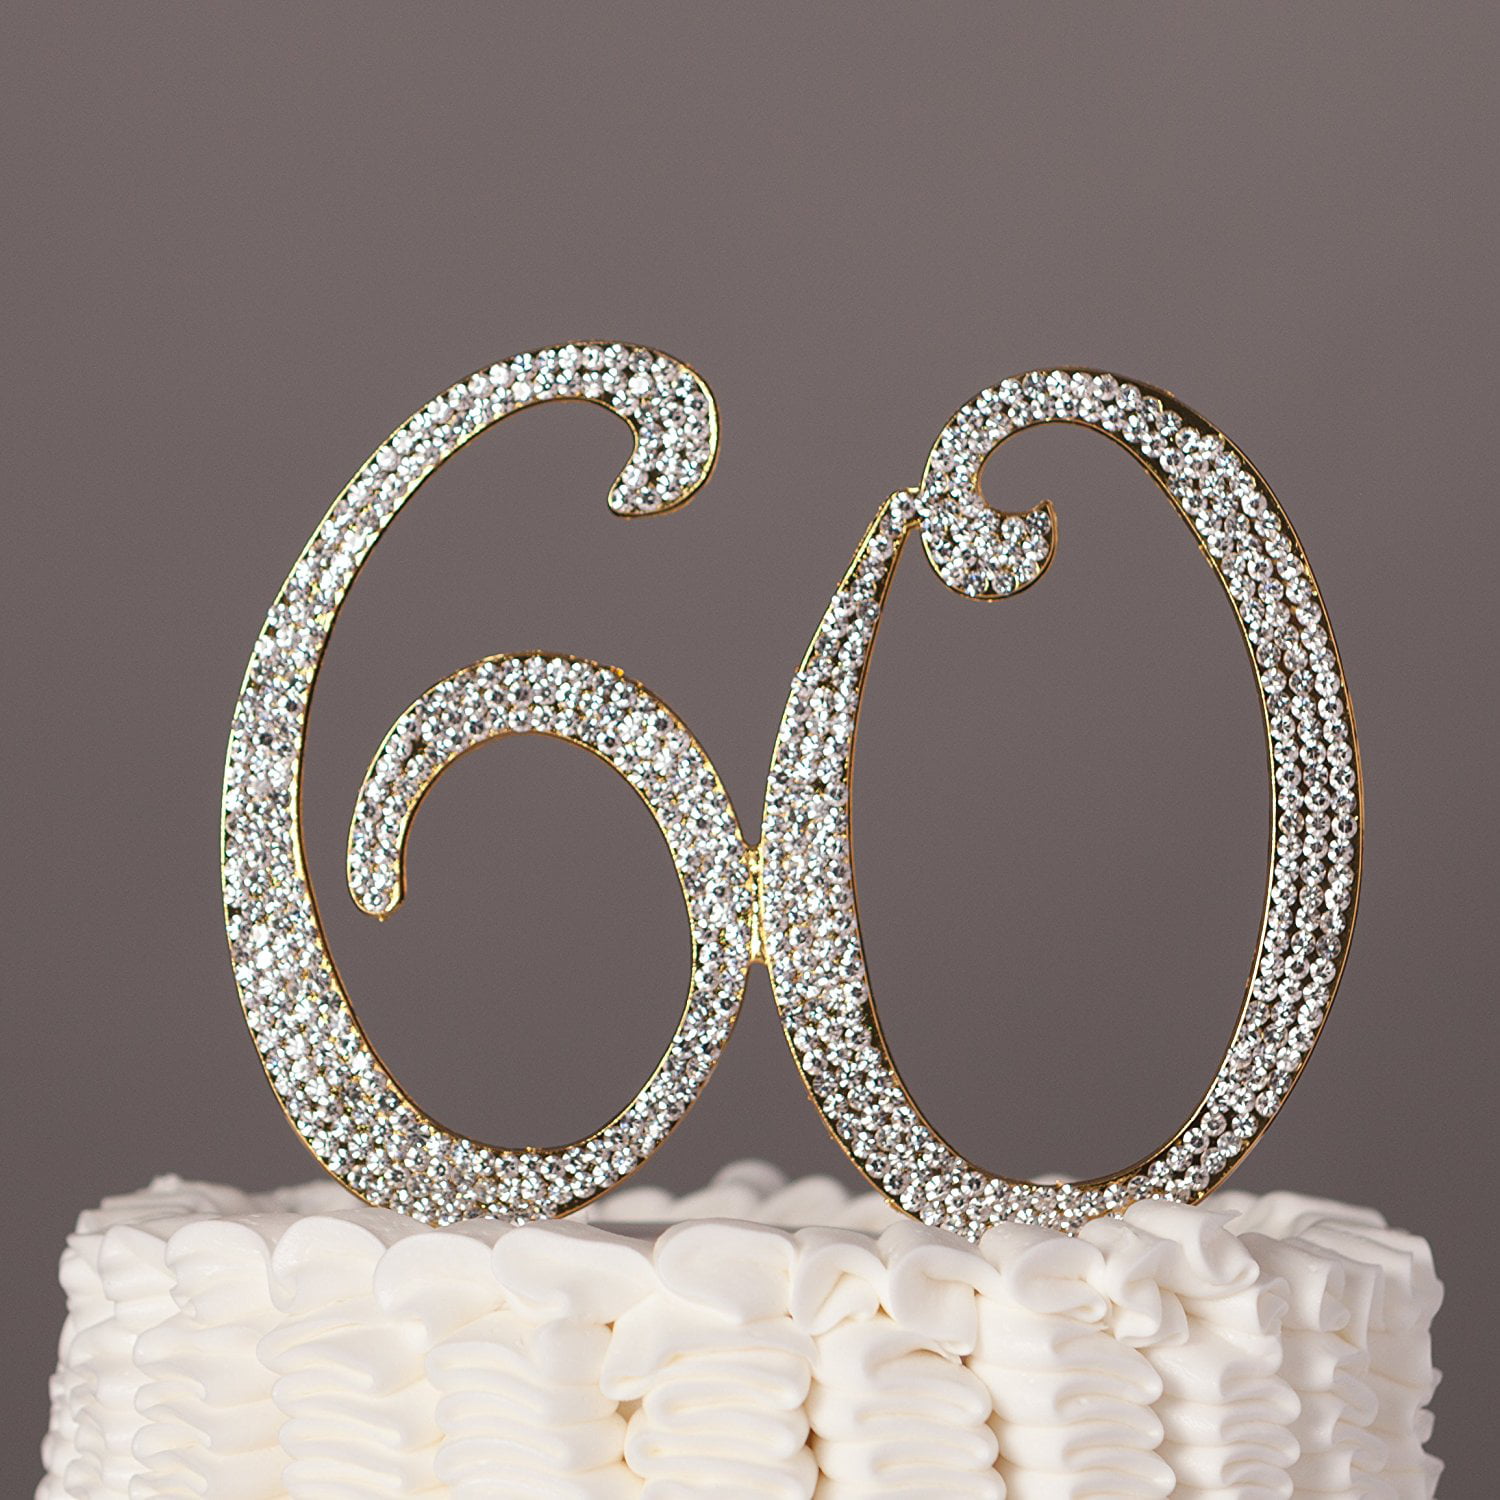 60 Cake Topper For 60th Birthday Or Anniversary Gold Party Supplies